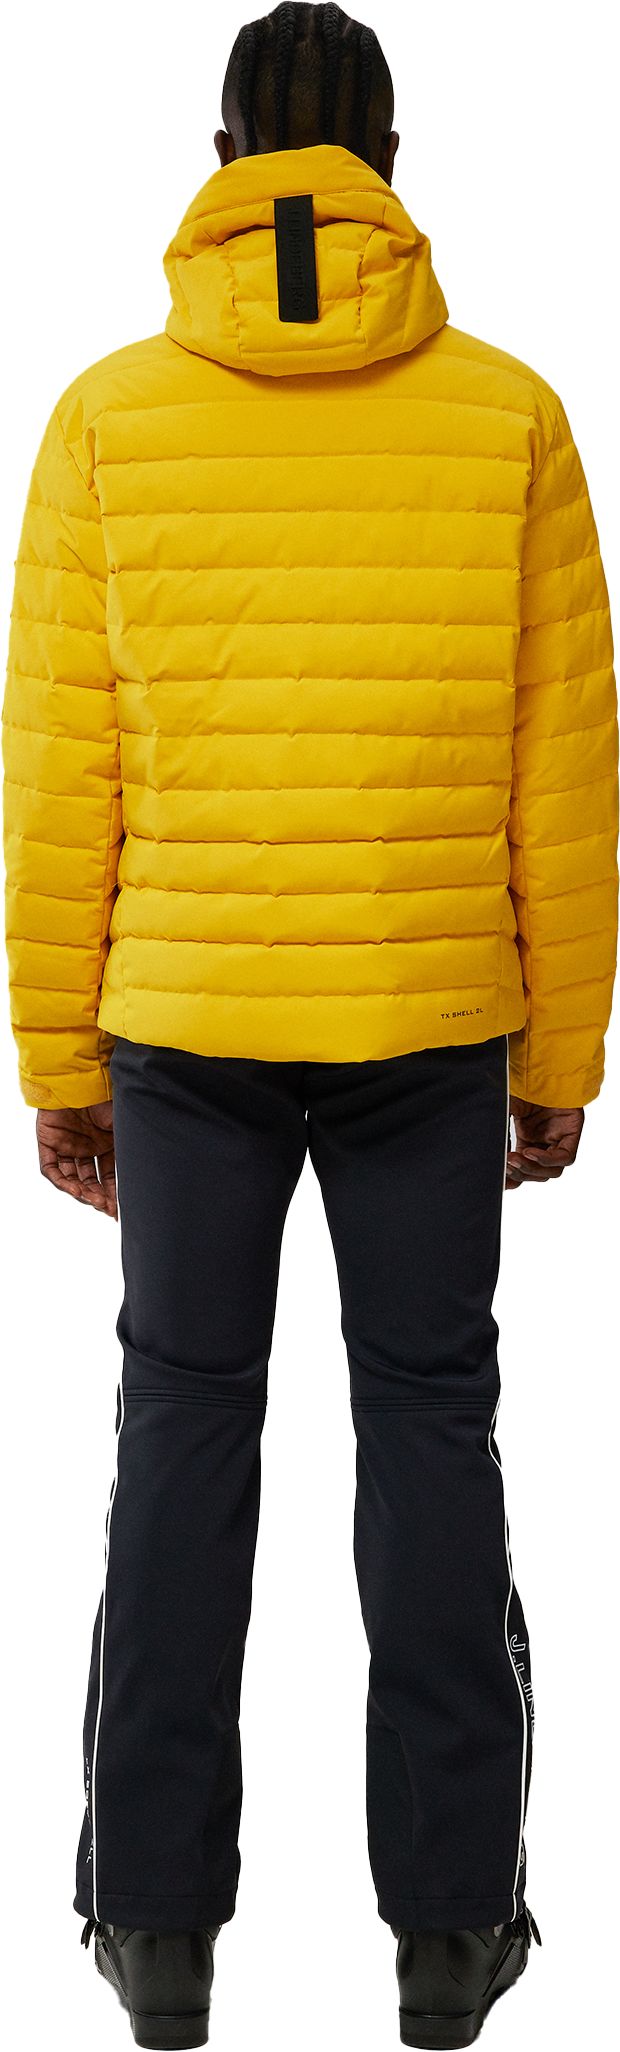 J LINDEBERG, M Thermic Pro Down Jacket